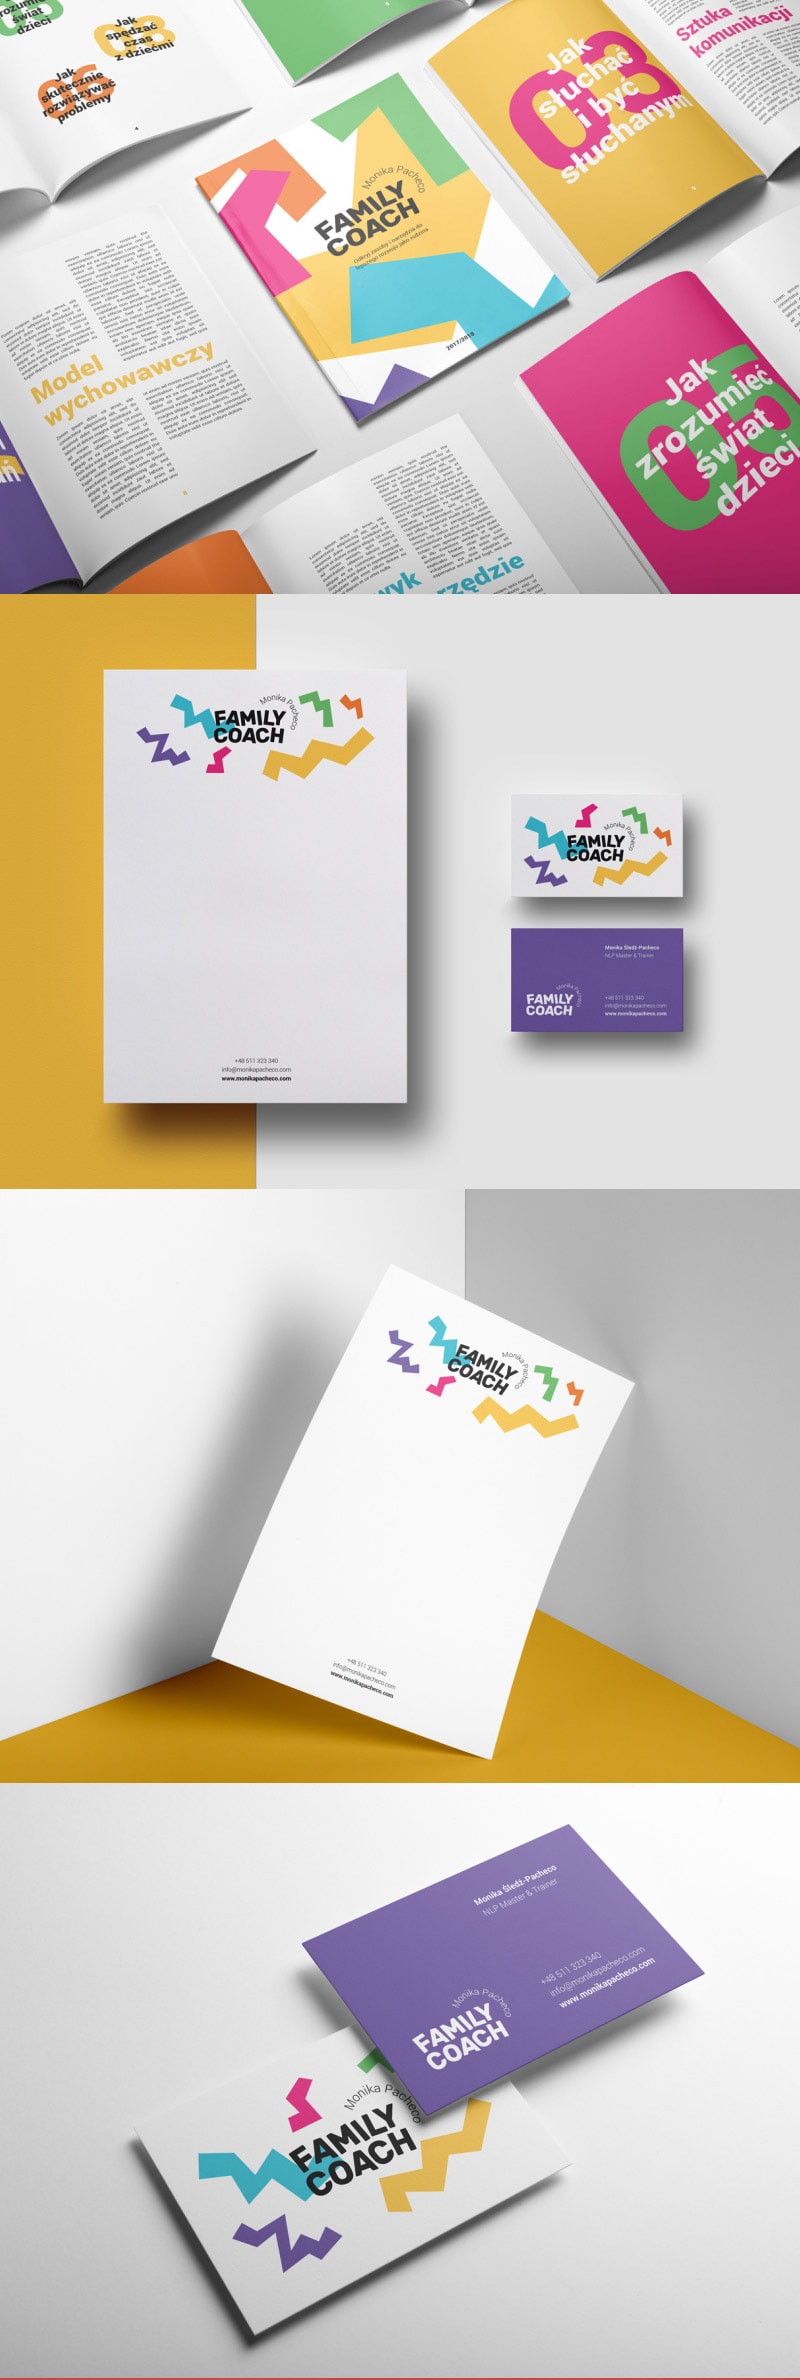 Download Stationery Branding PSD Mockups - Find the Perfect ...